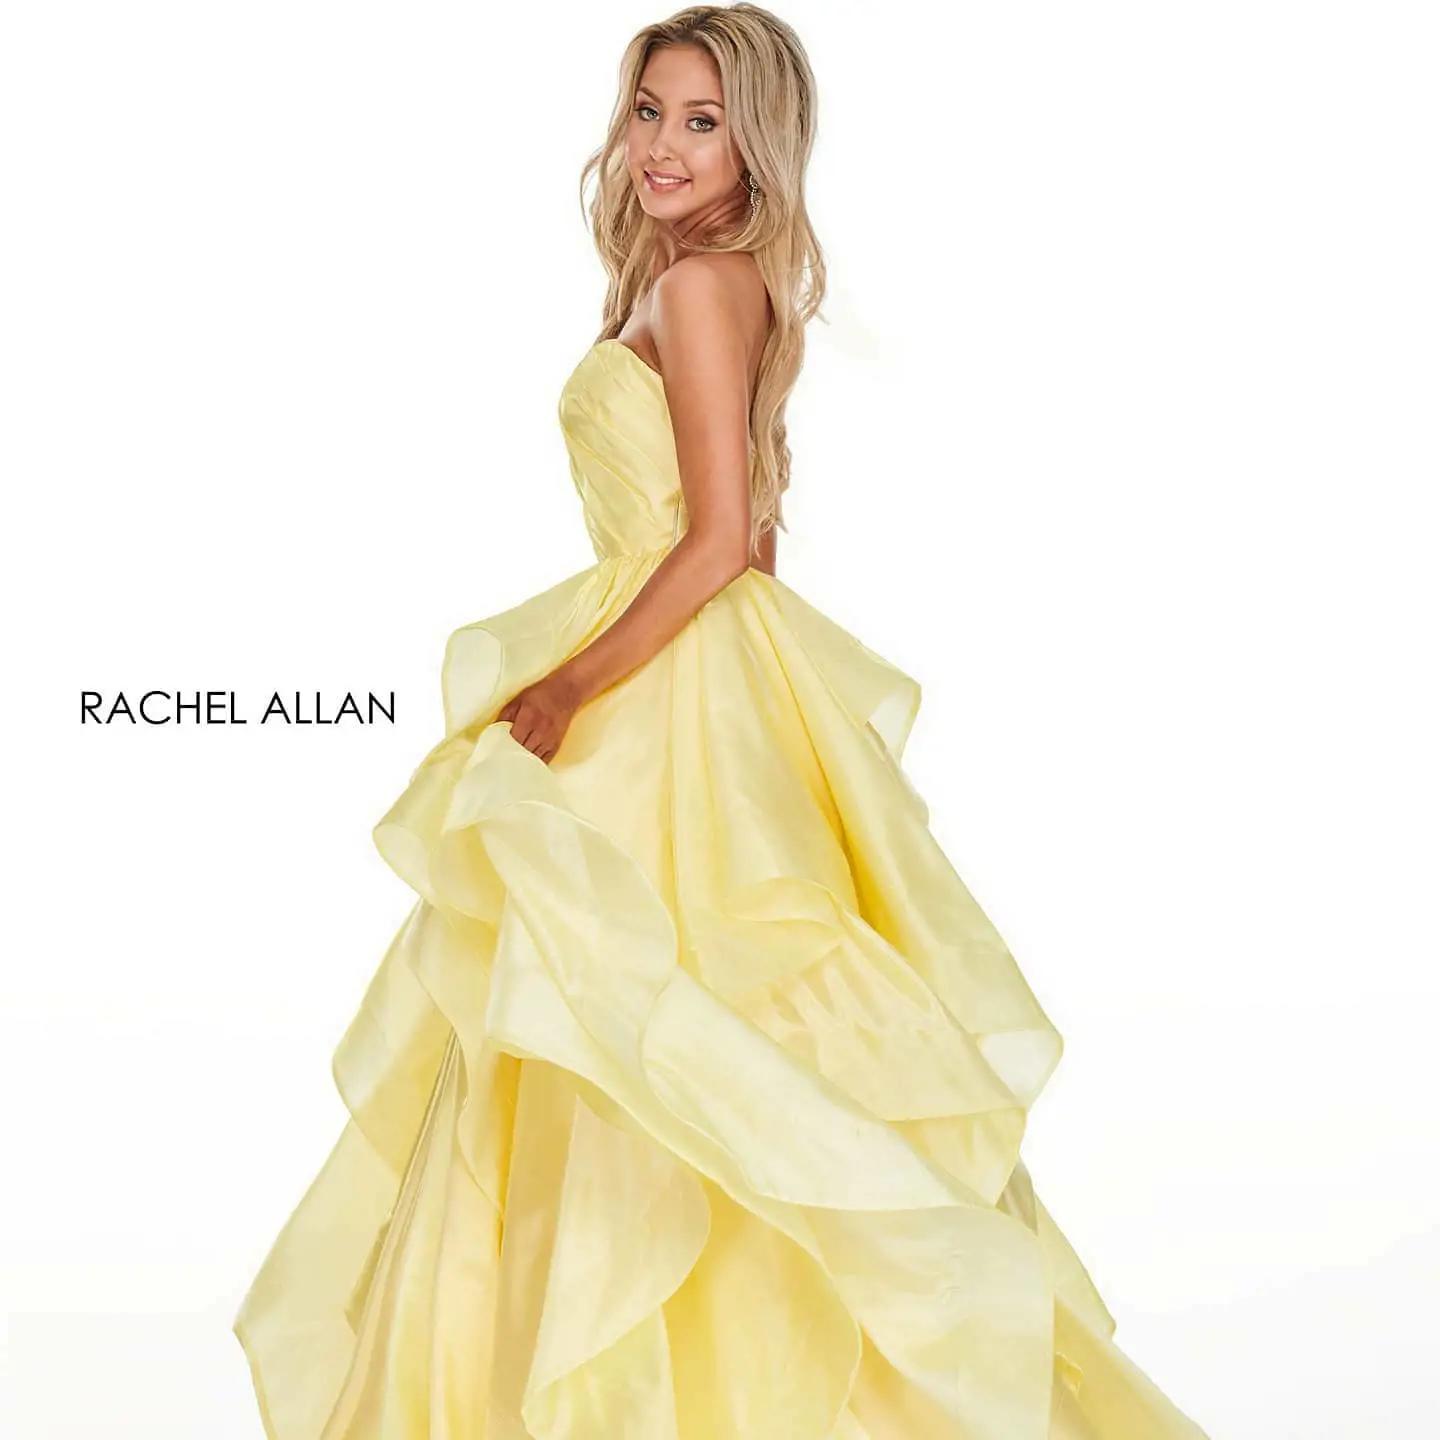 Model wearing a yellow dress. Mobile image